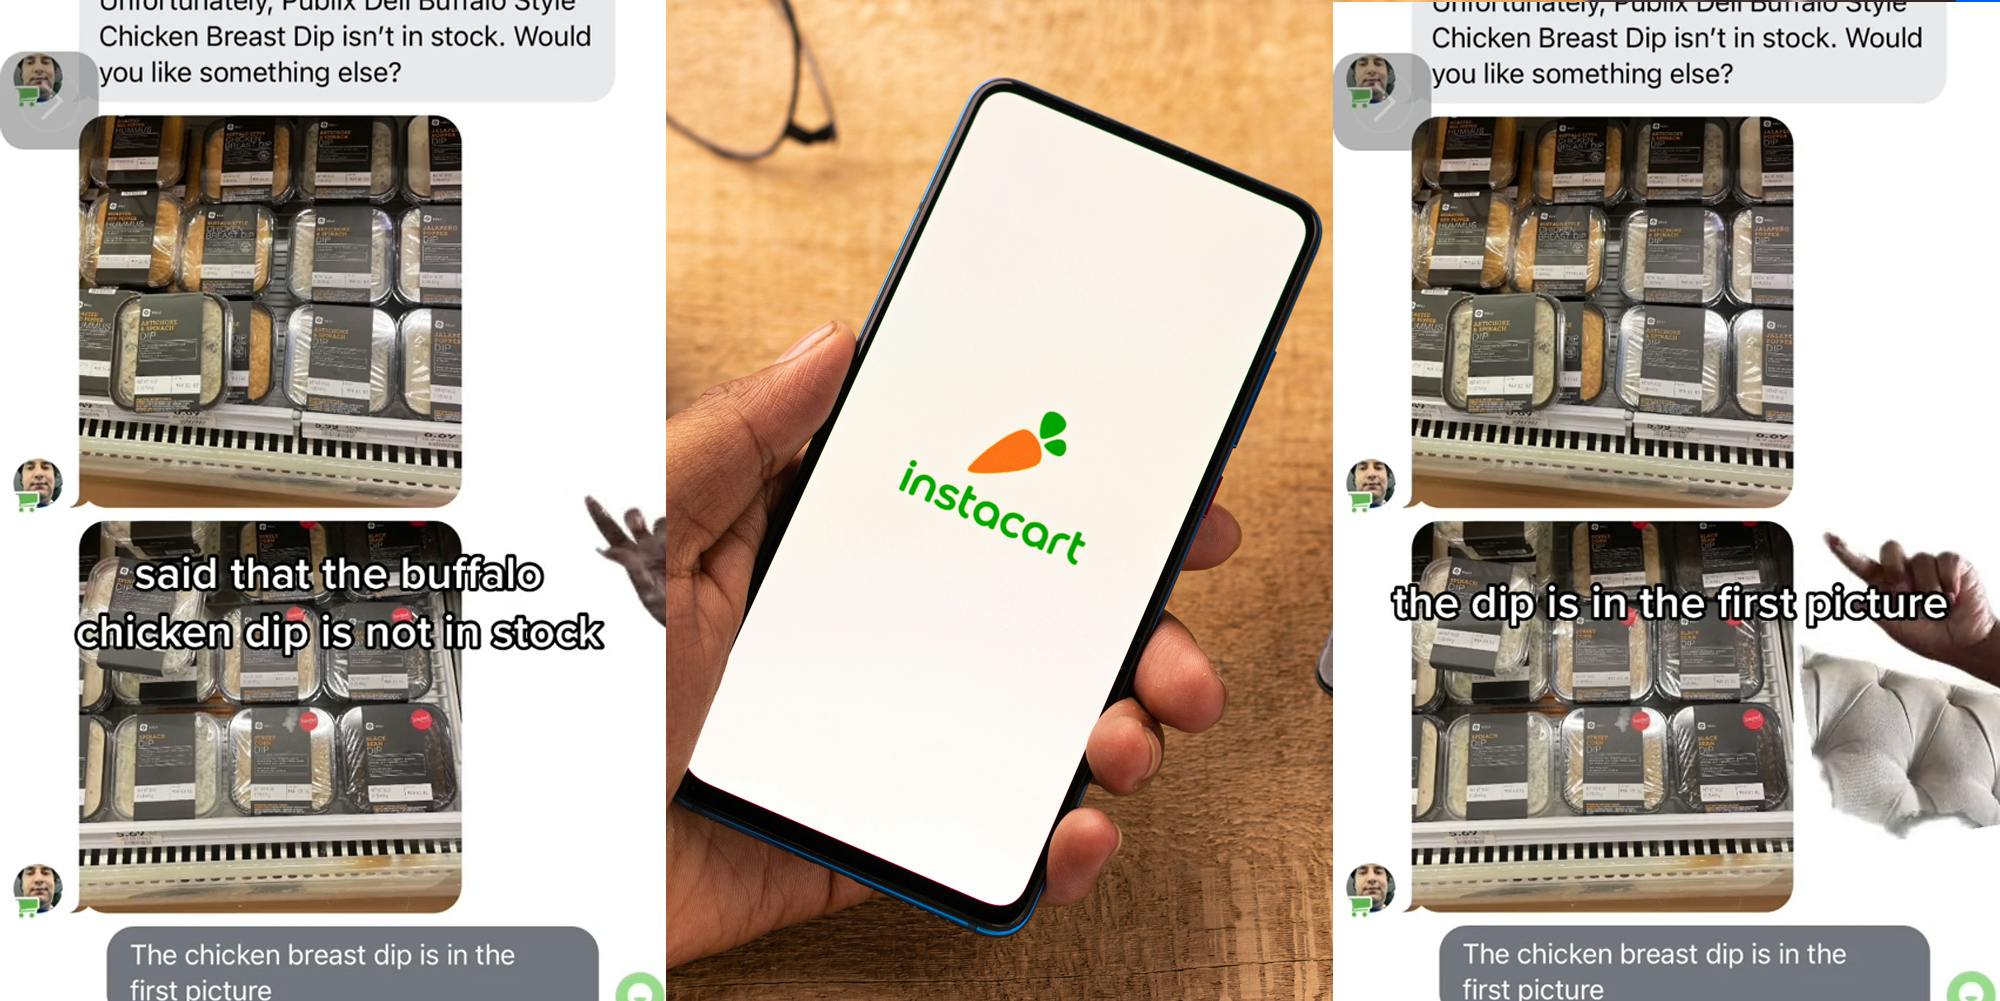 hand greenscreen TikTok over messages between them and Instacart shopper with caption "said that the buffalo chicken dip is not in stock" (l) hand holding phone with Instacart on screen in front of tan background (c) hand greenscreen TikTok over messages between them and Instacart shopper with caption "the dip is in the first picture" (r)